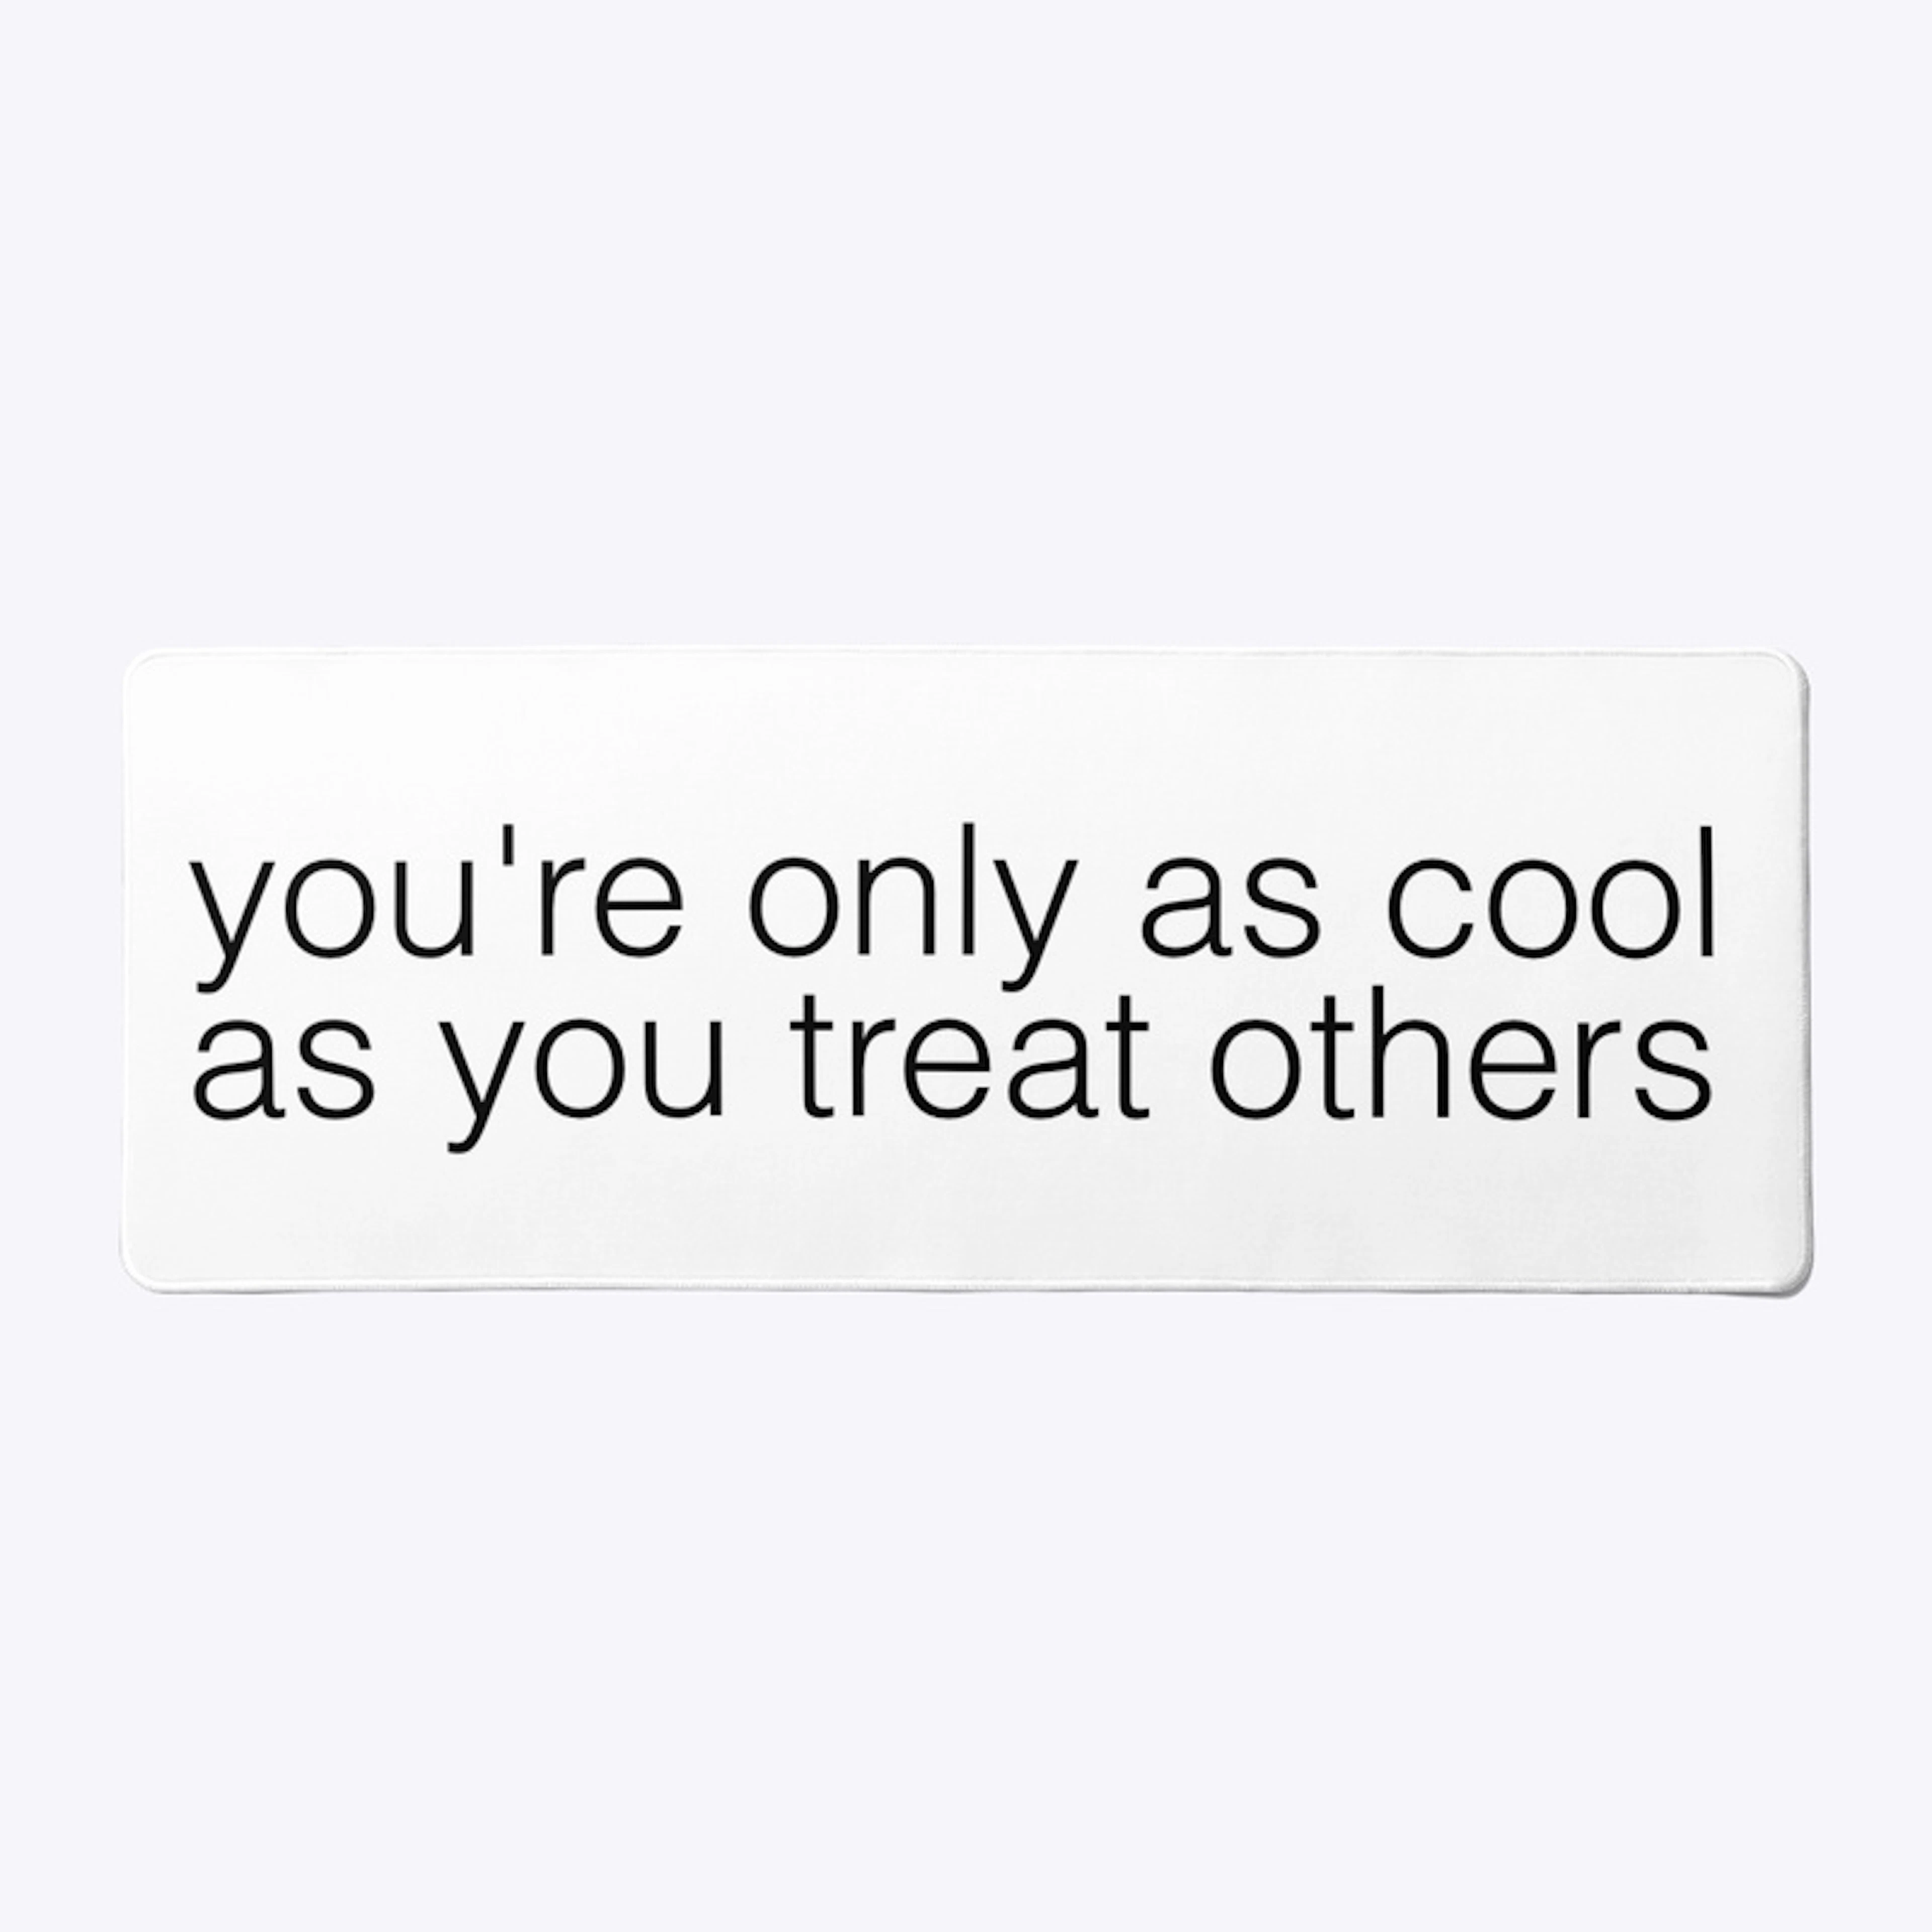 “you’re only as cool as you treat others